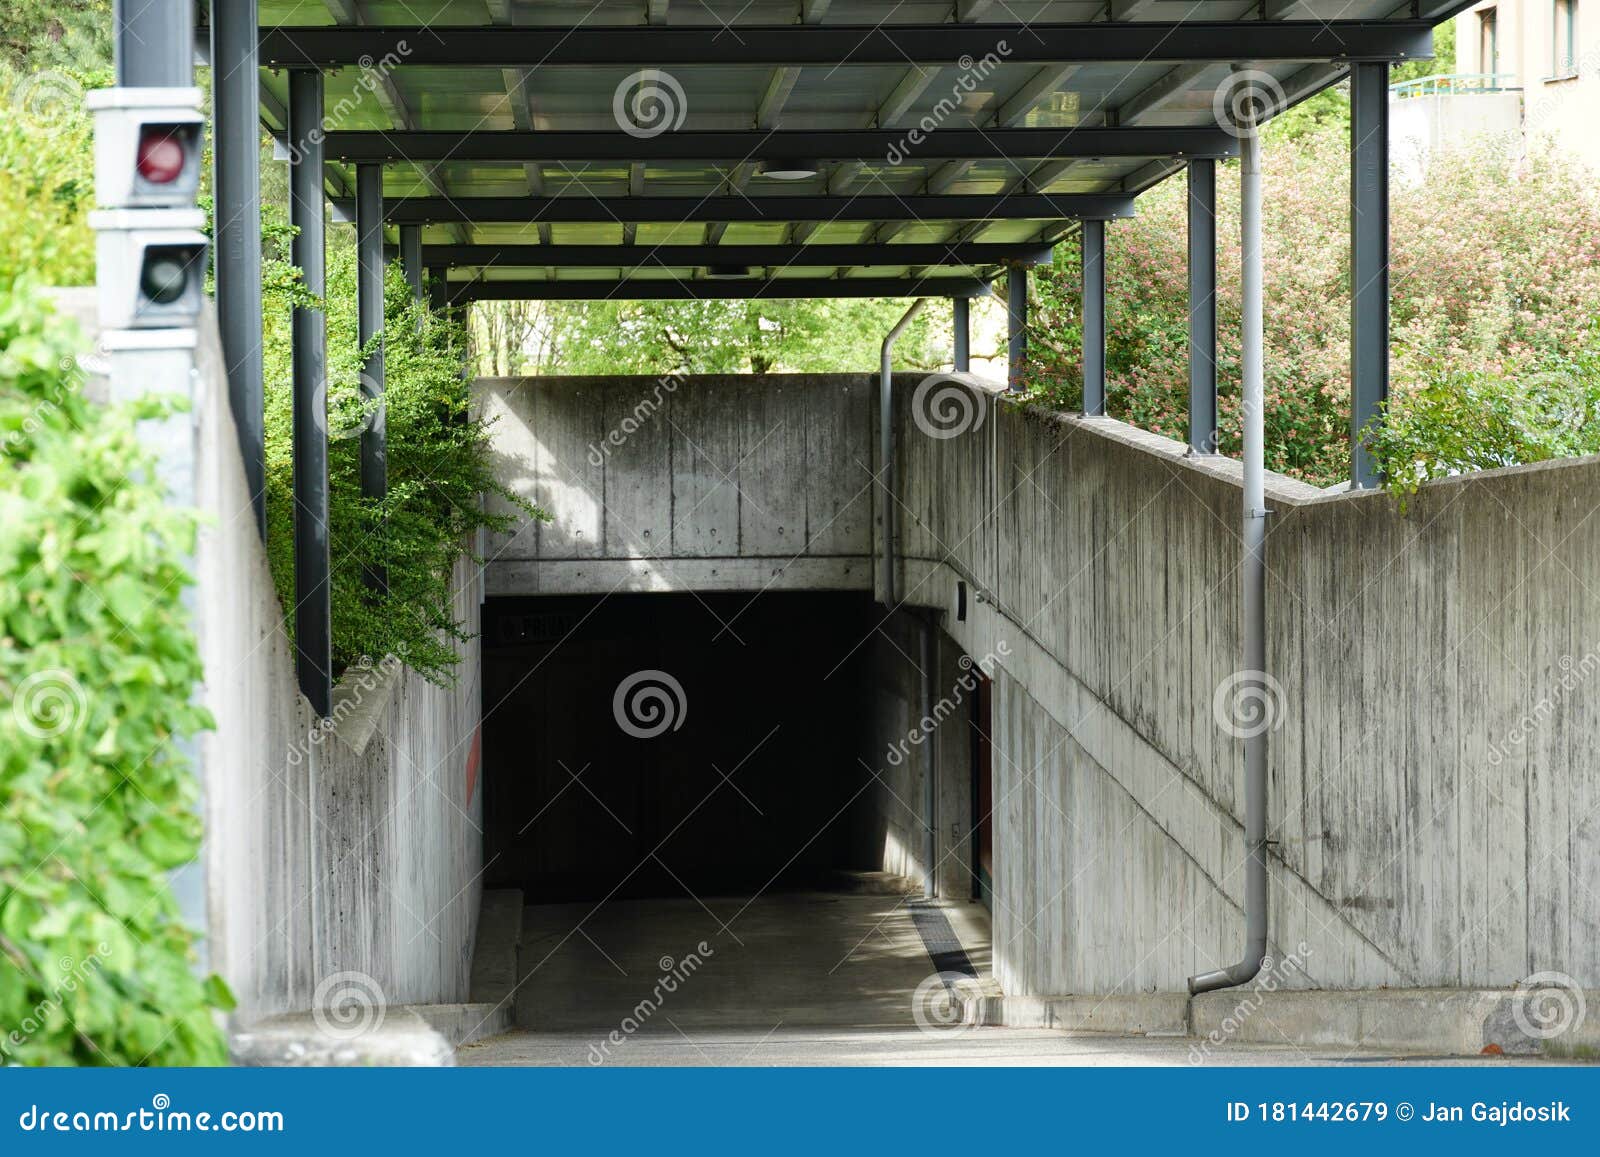 A Single Lane Entrance And Exit Of An Underground Garage 